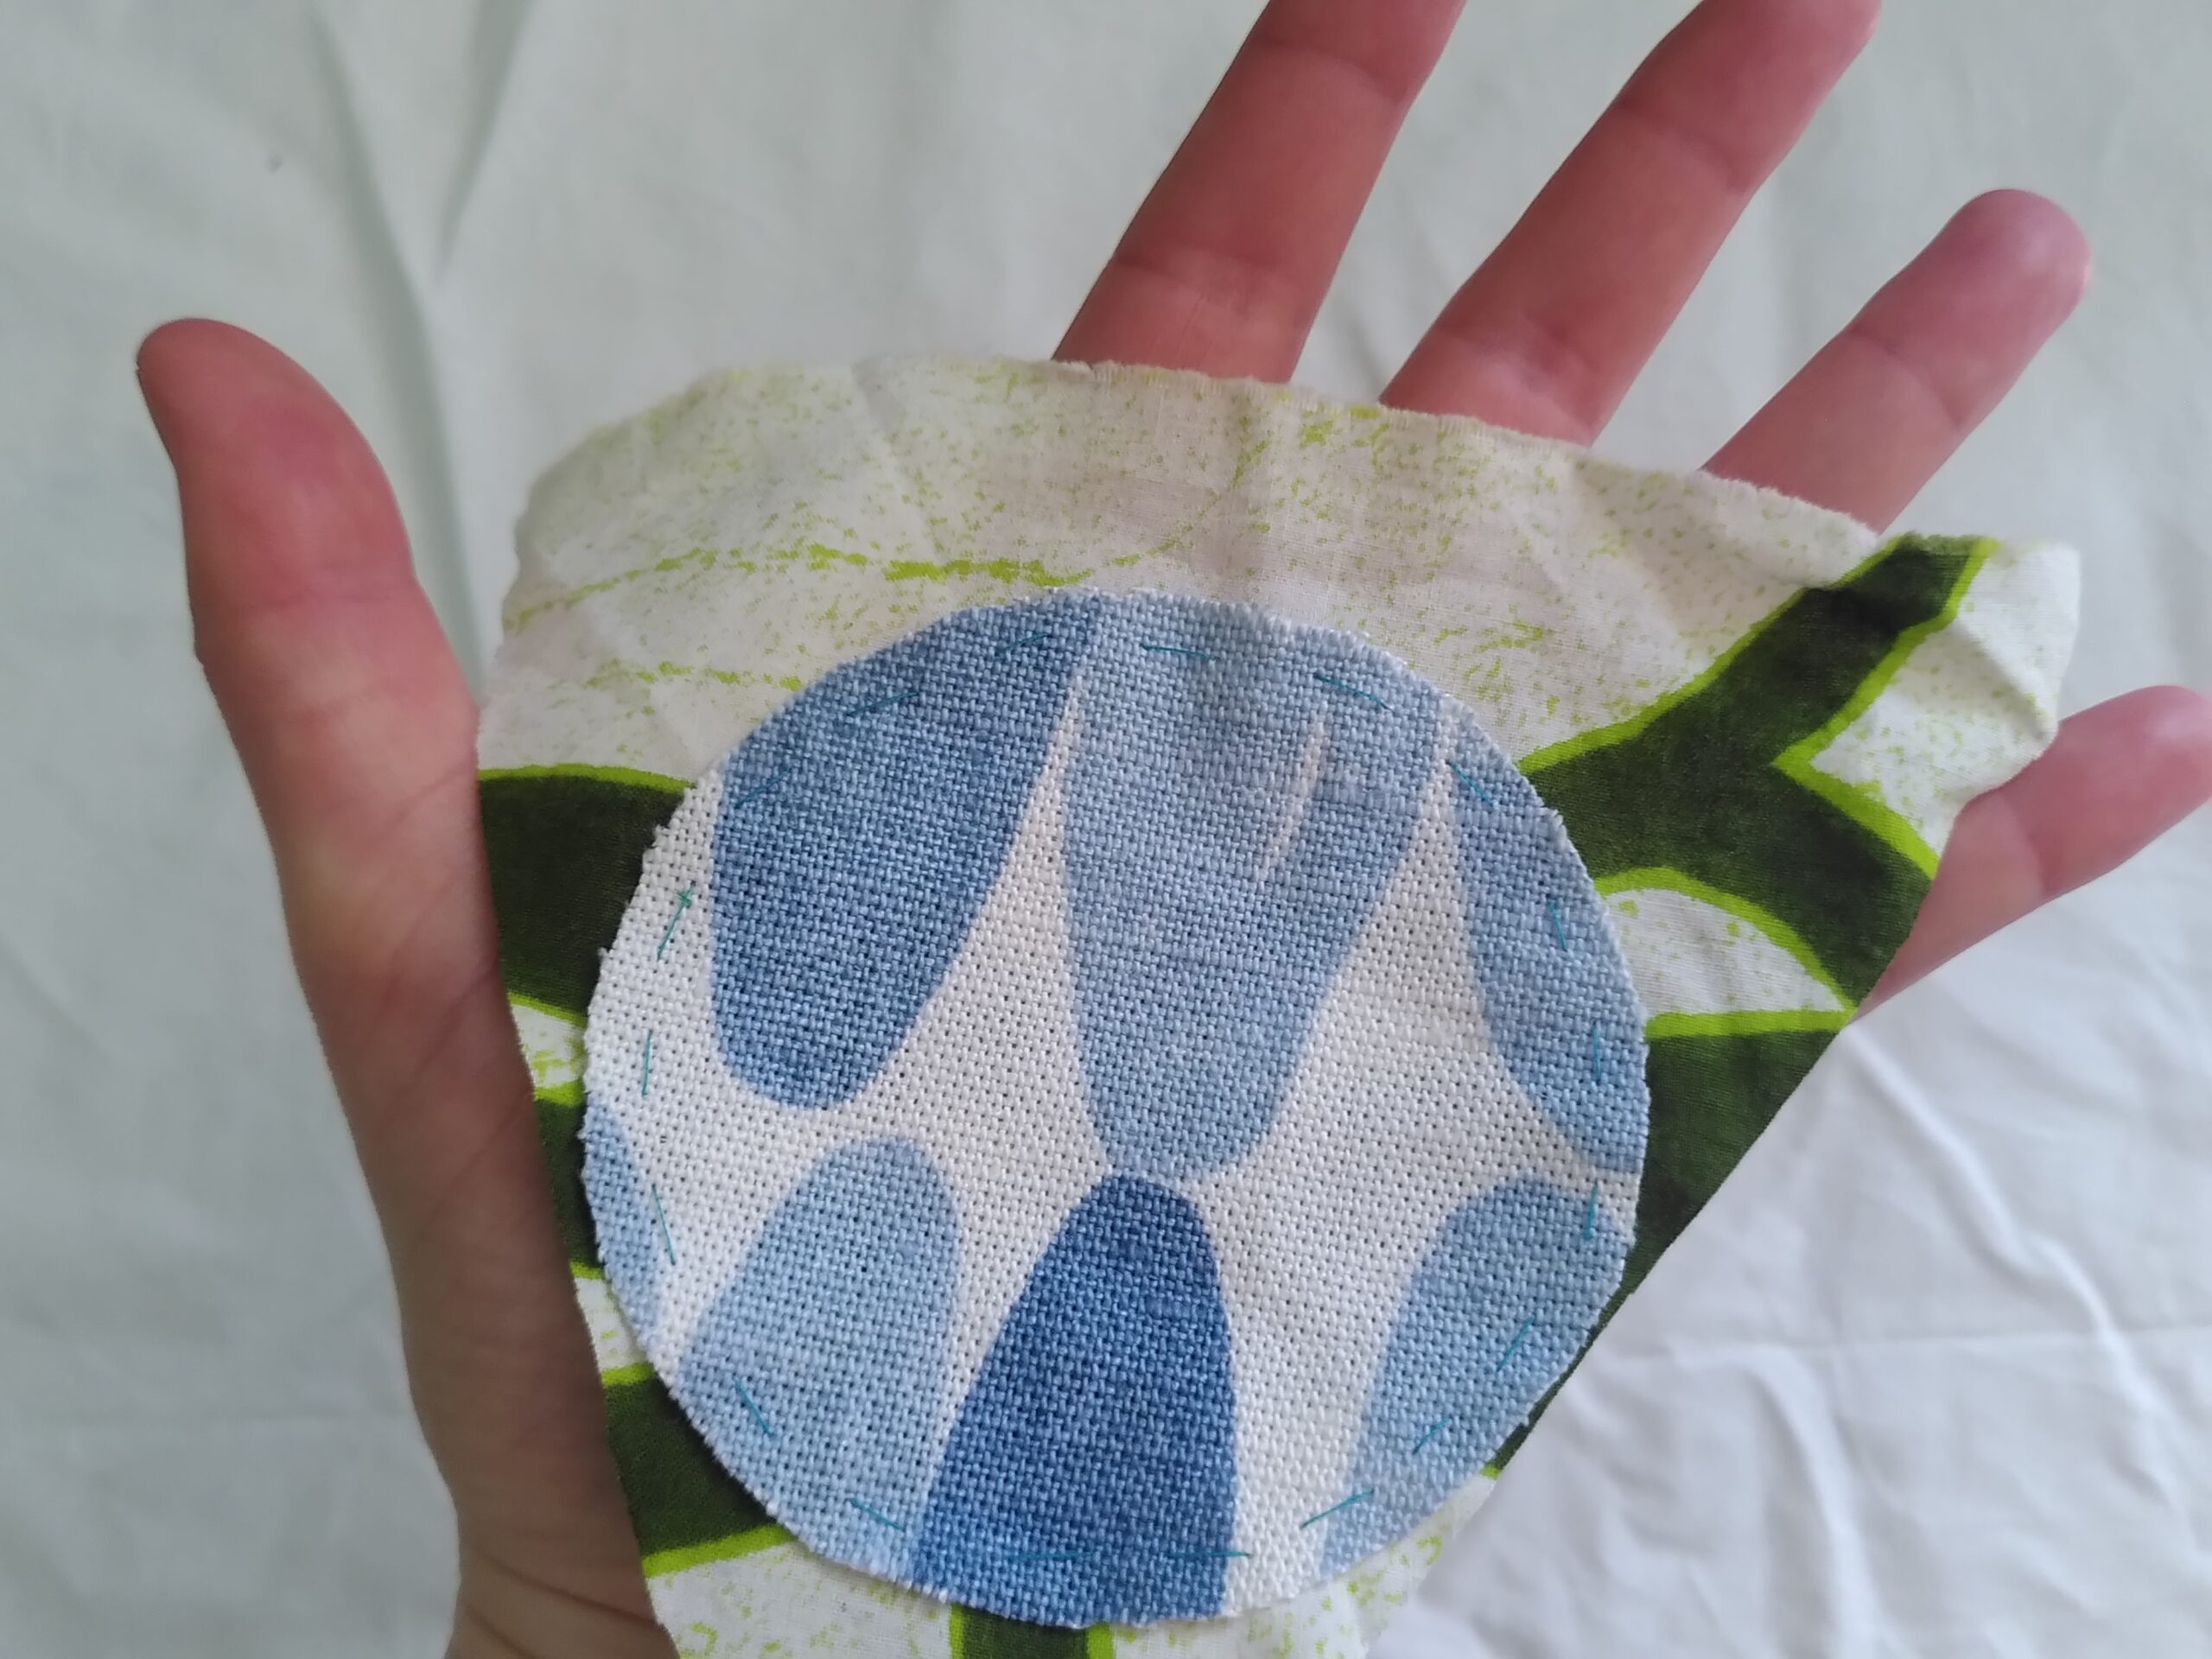 In the palm of a hand is a green and cream coloured bunting flag with a circle of blue and cream fabric placed on top